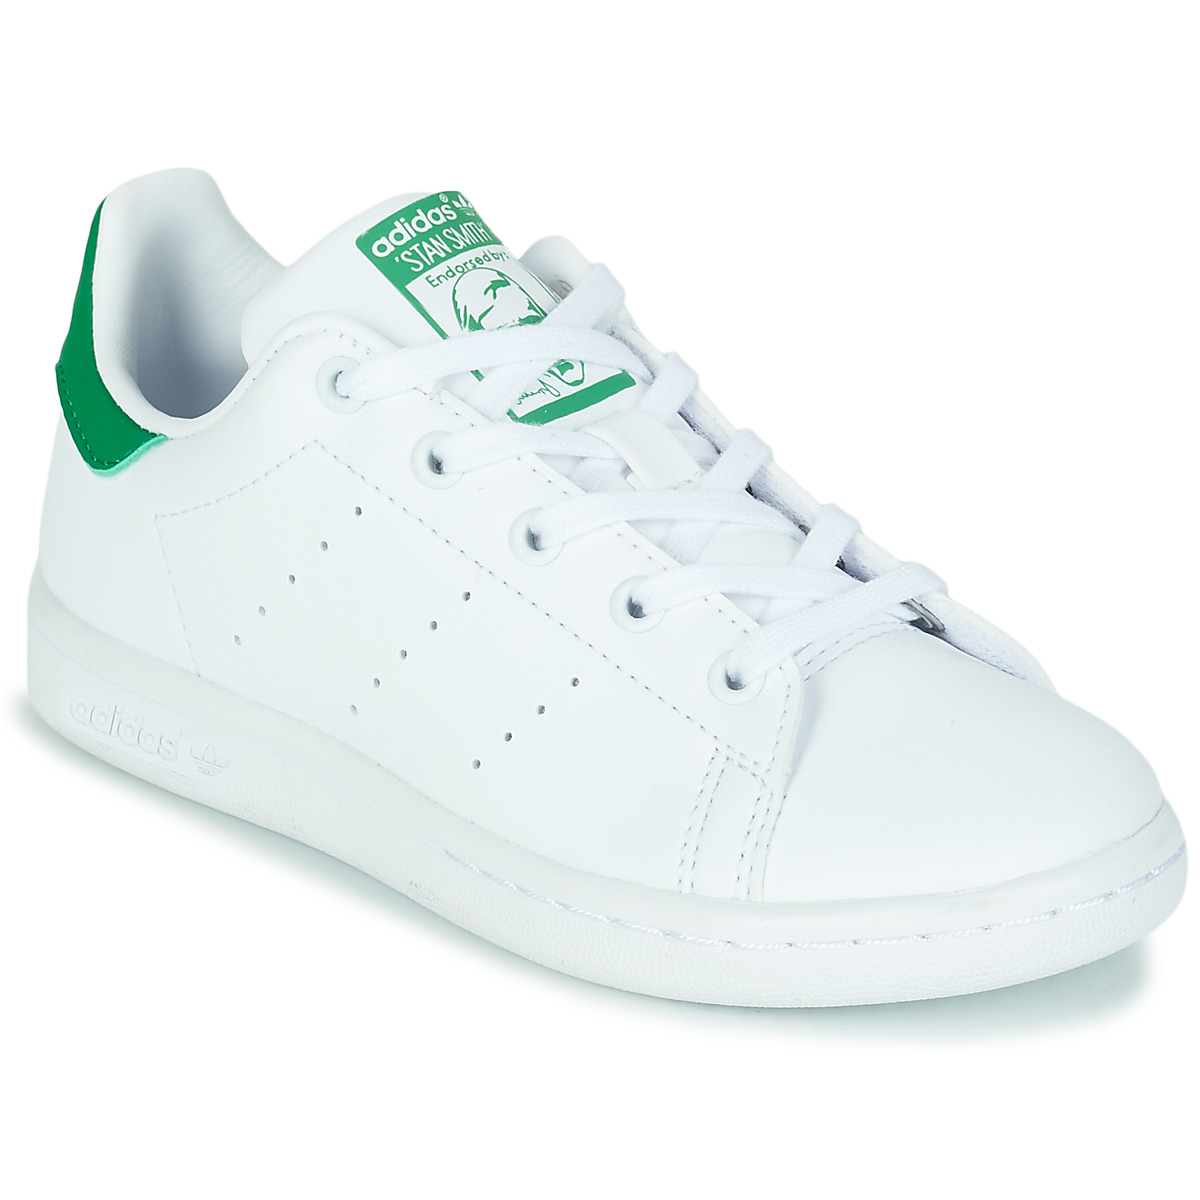 Chaussures Enfant adidas women barbour collaboration shoes outlet mall STAN SMITH C ECO-RESPONSABLE Blanc / Vert